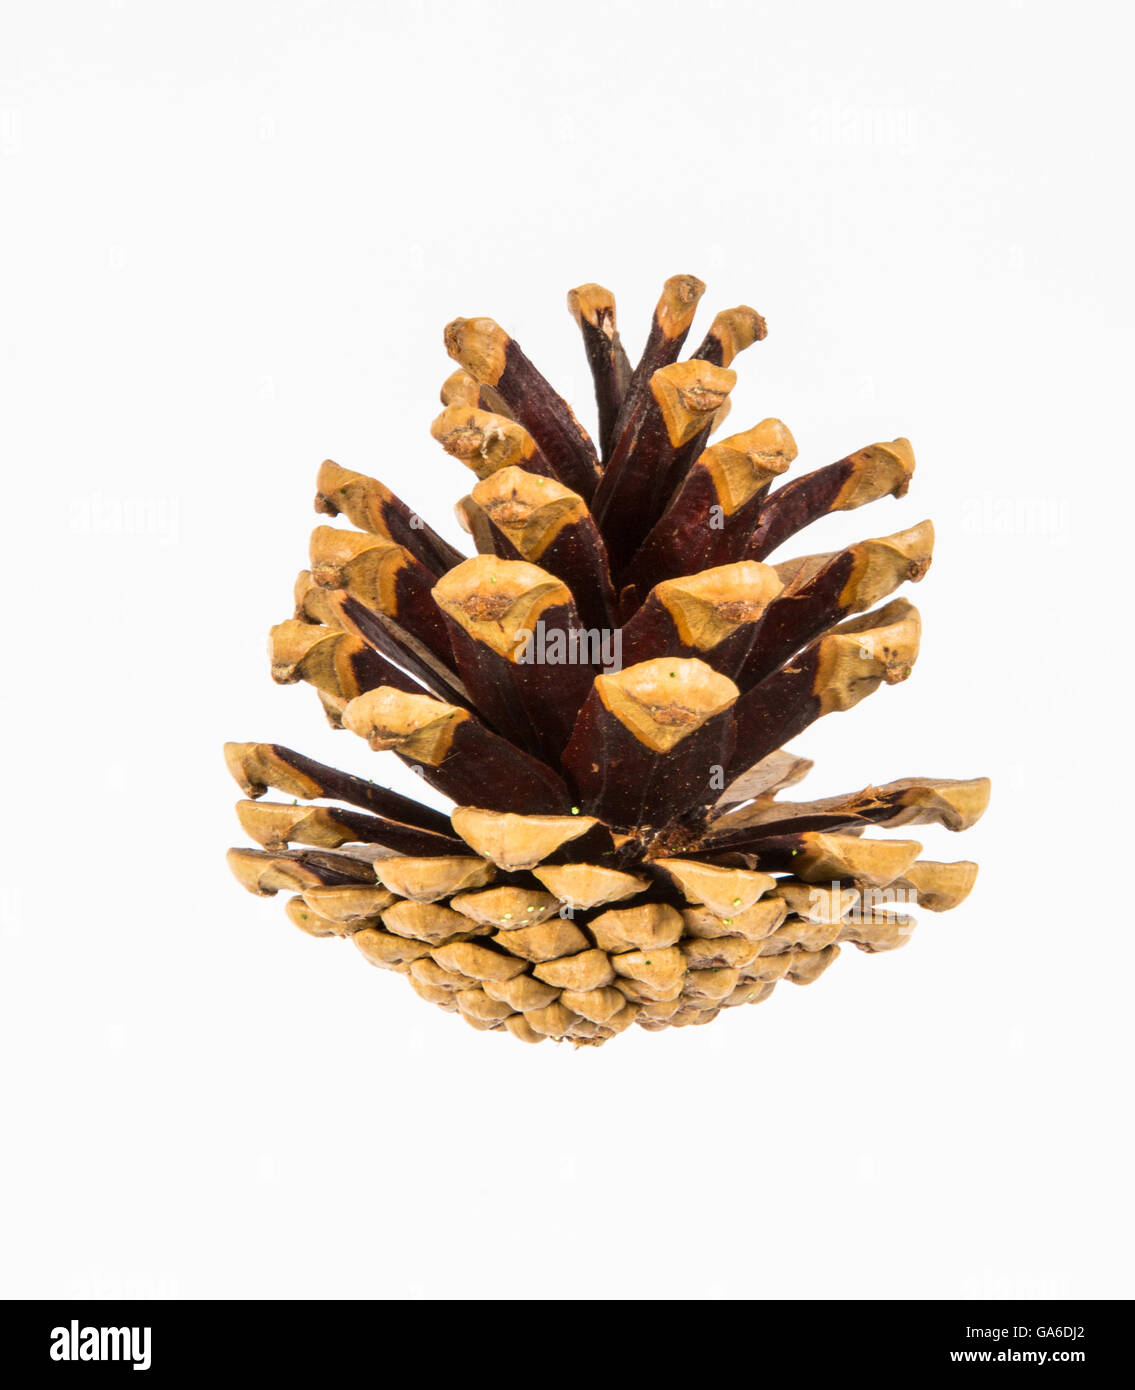 A pine cone on a white background Stock Photo